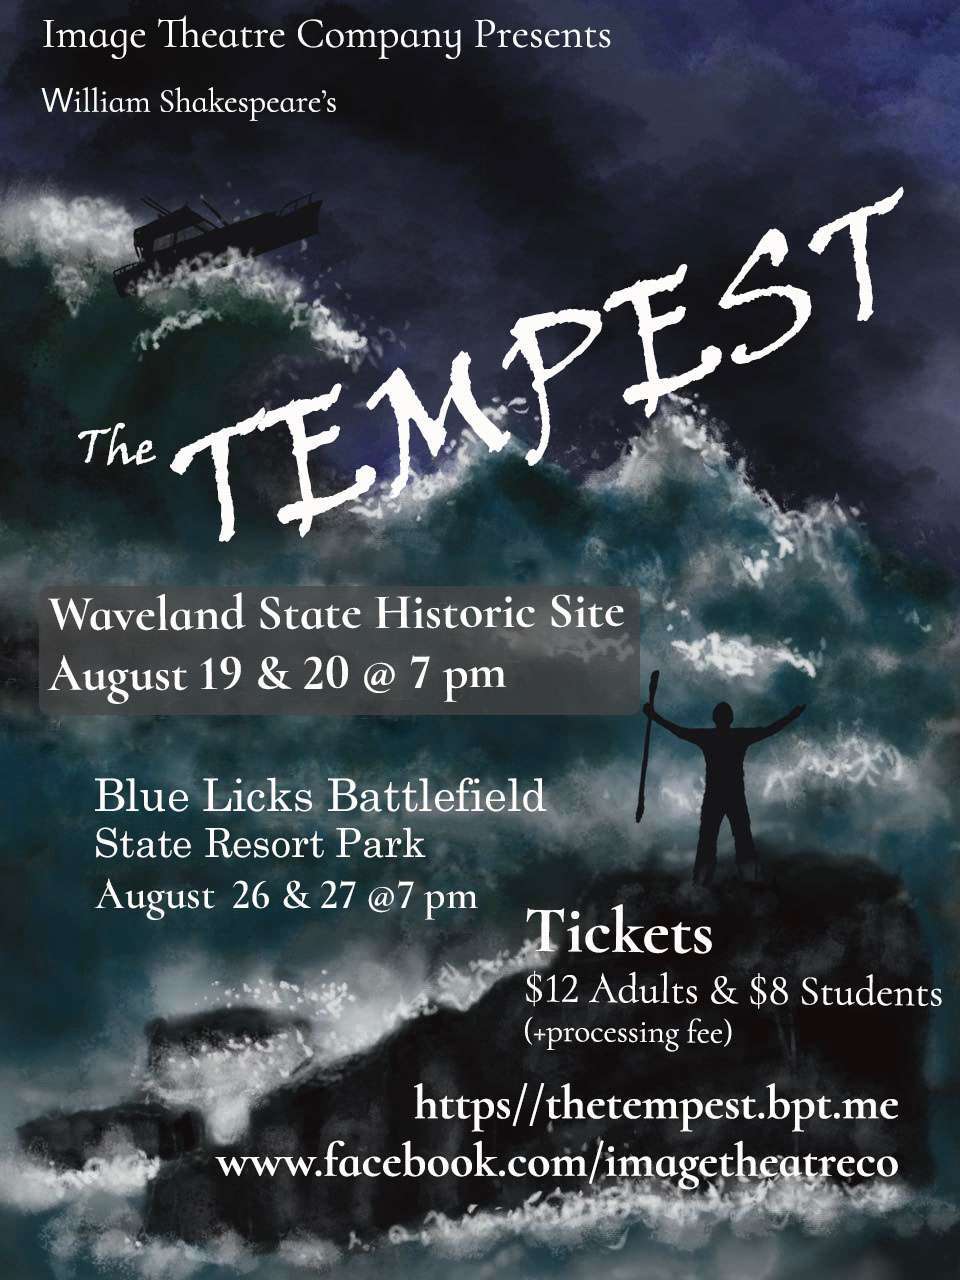 Tempest resumes performance schedule this weekend and next